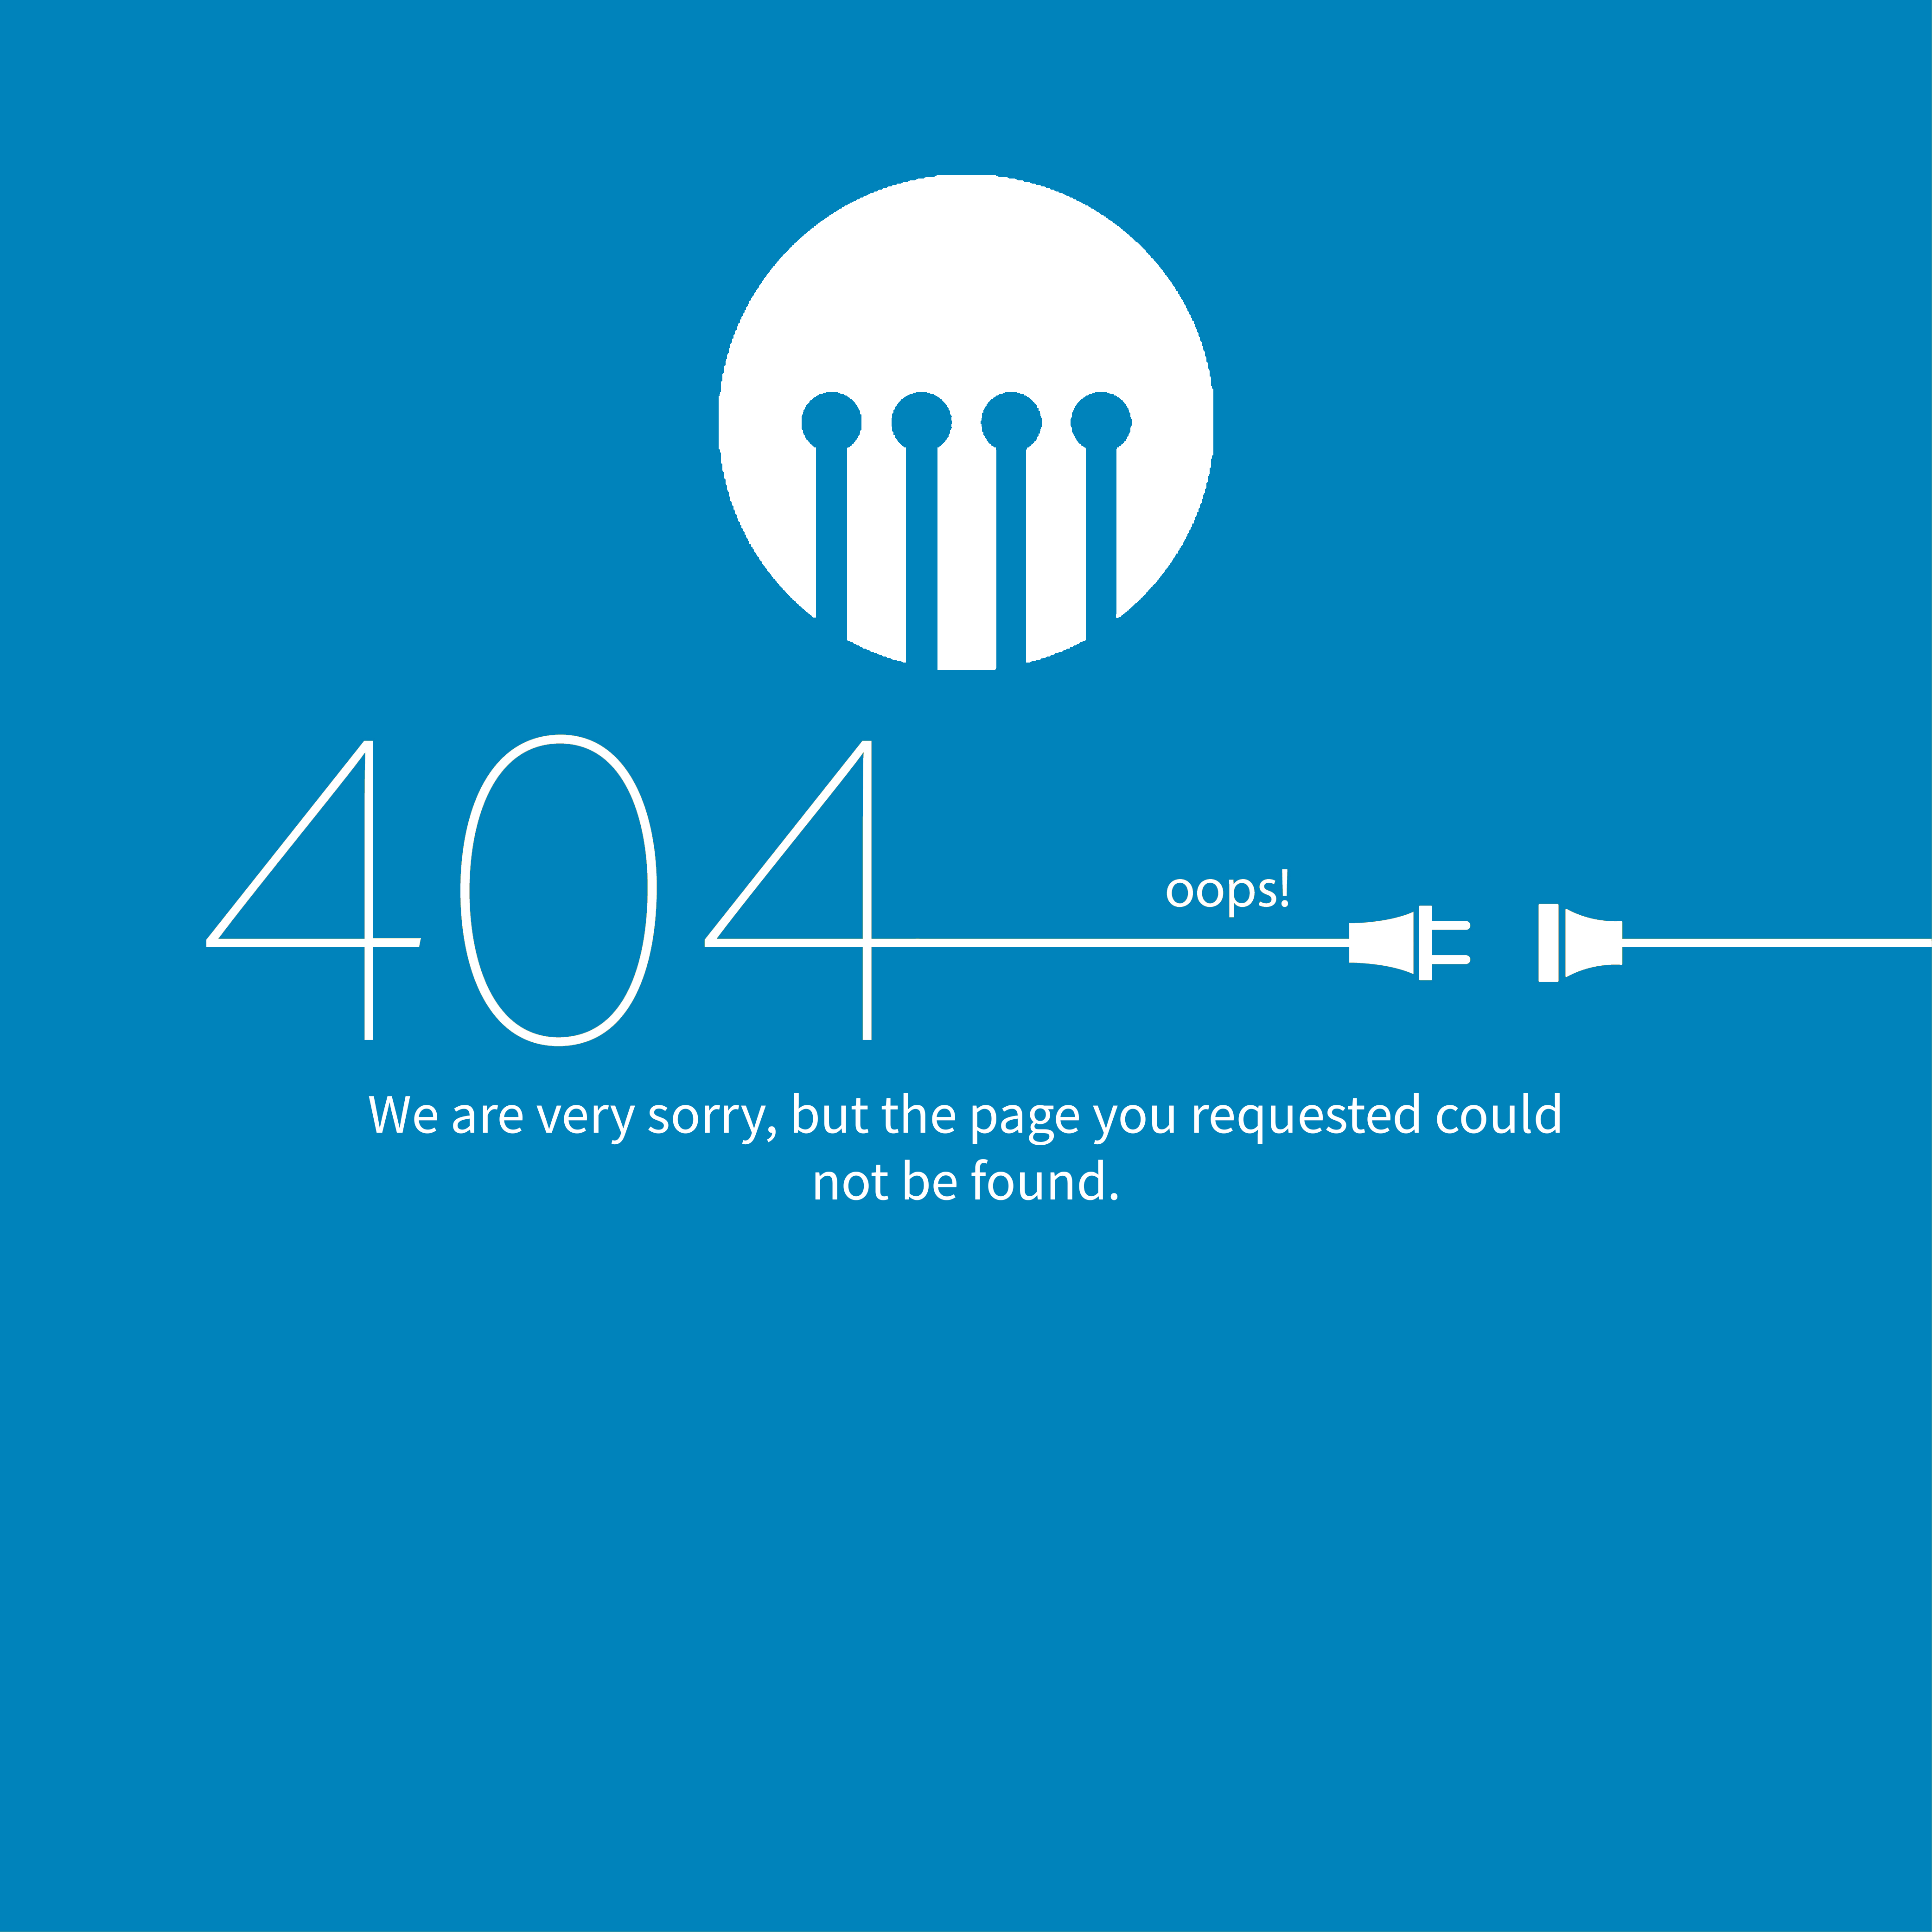 404 Page not found.